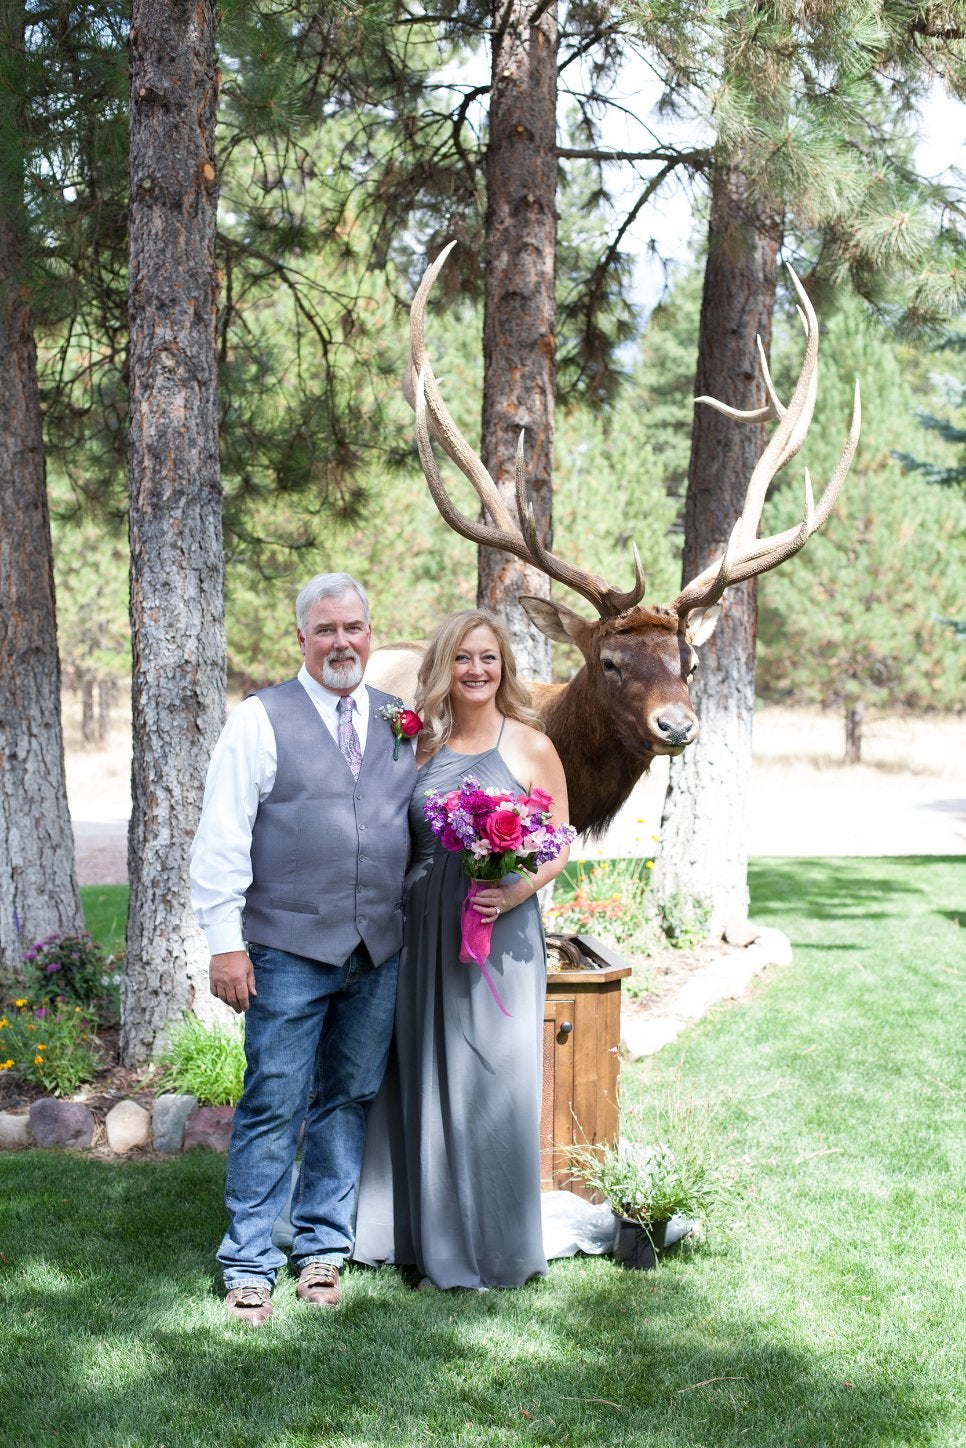 Steve Felix with his wife and bull